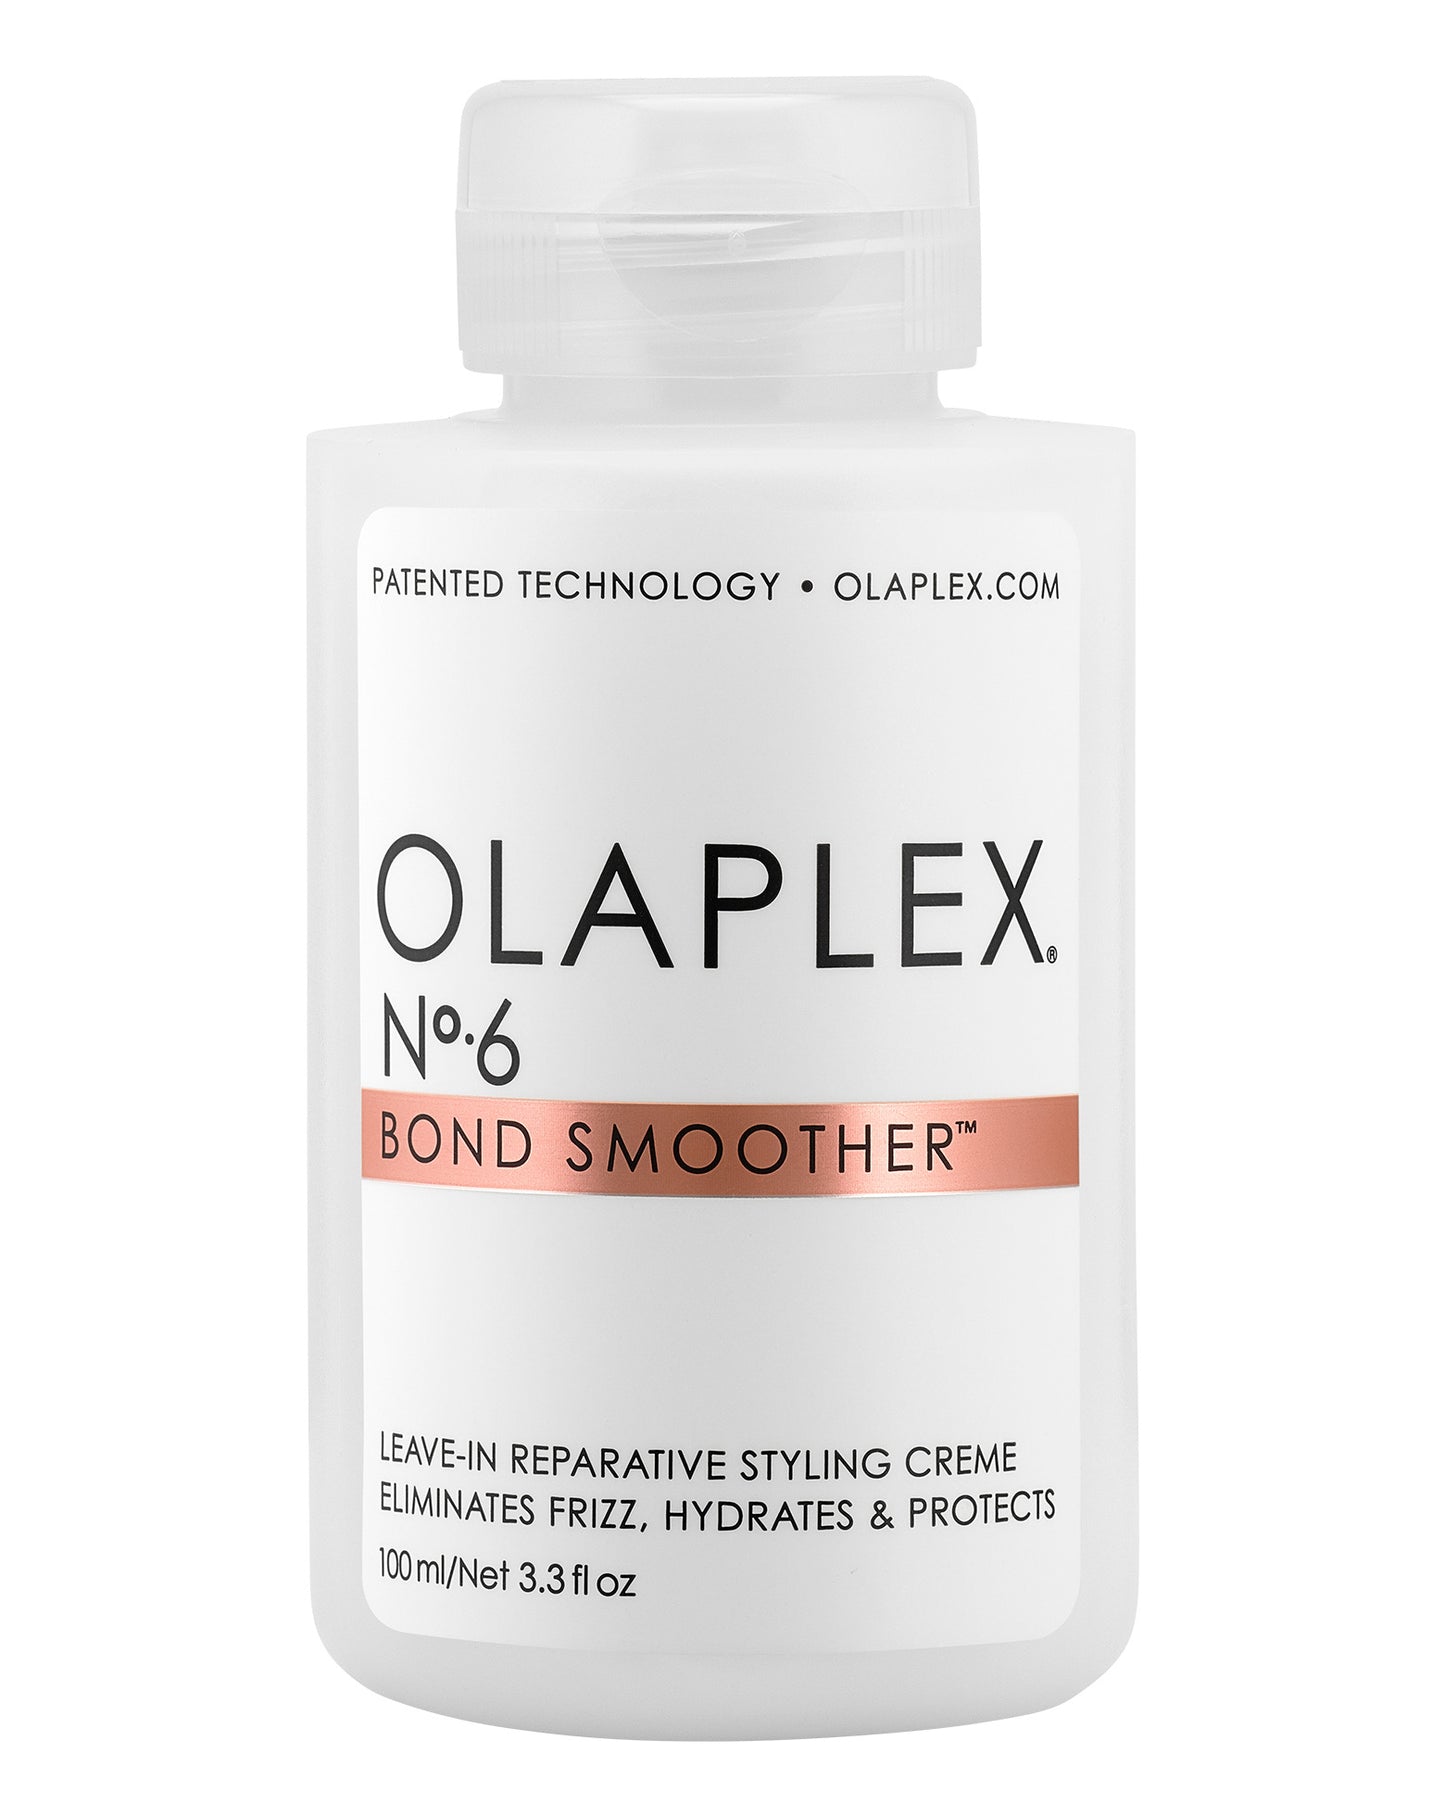 Olaplex #6 Bond Smoother Leave-In Treatment and Styling Product